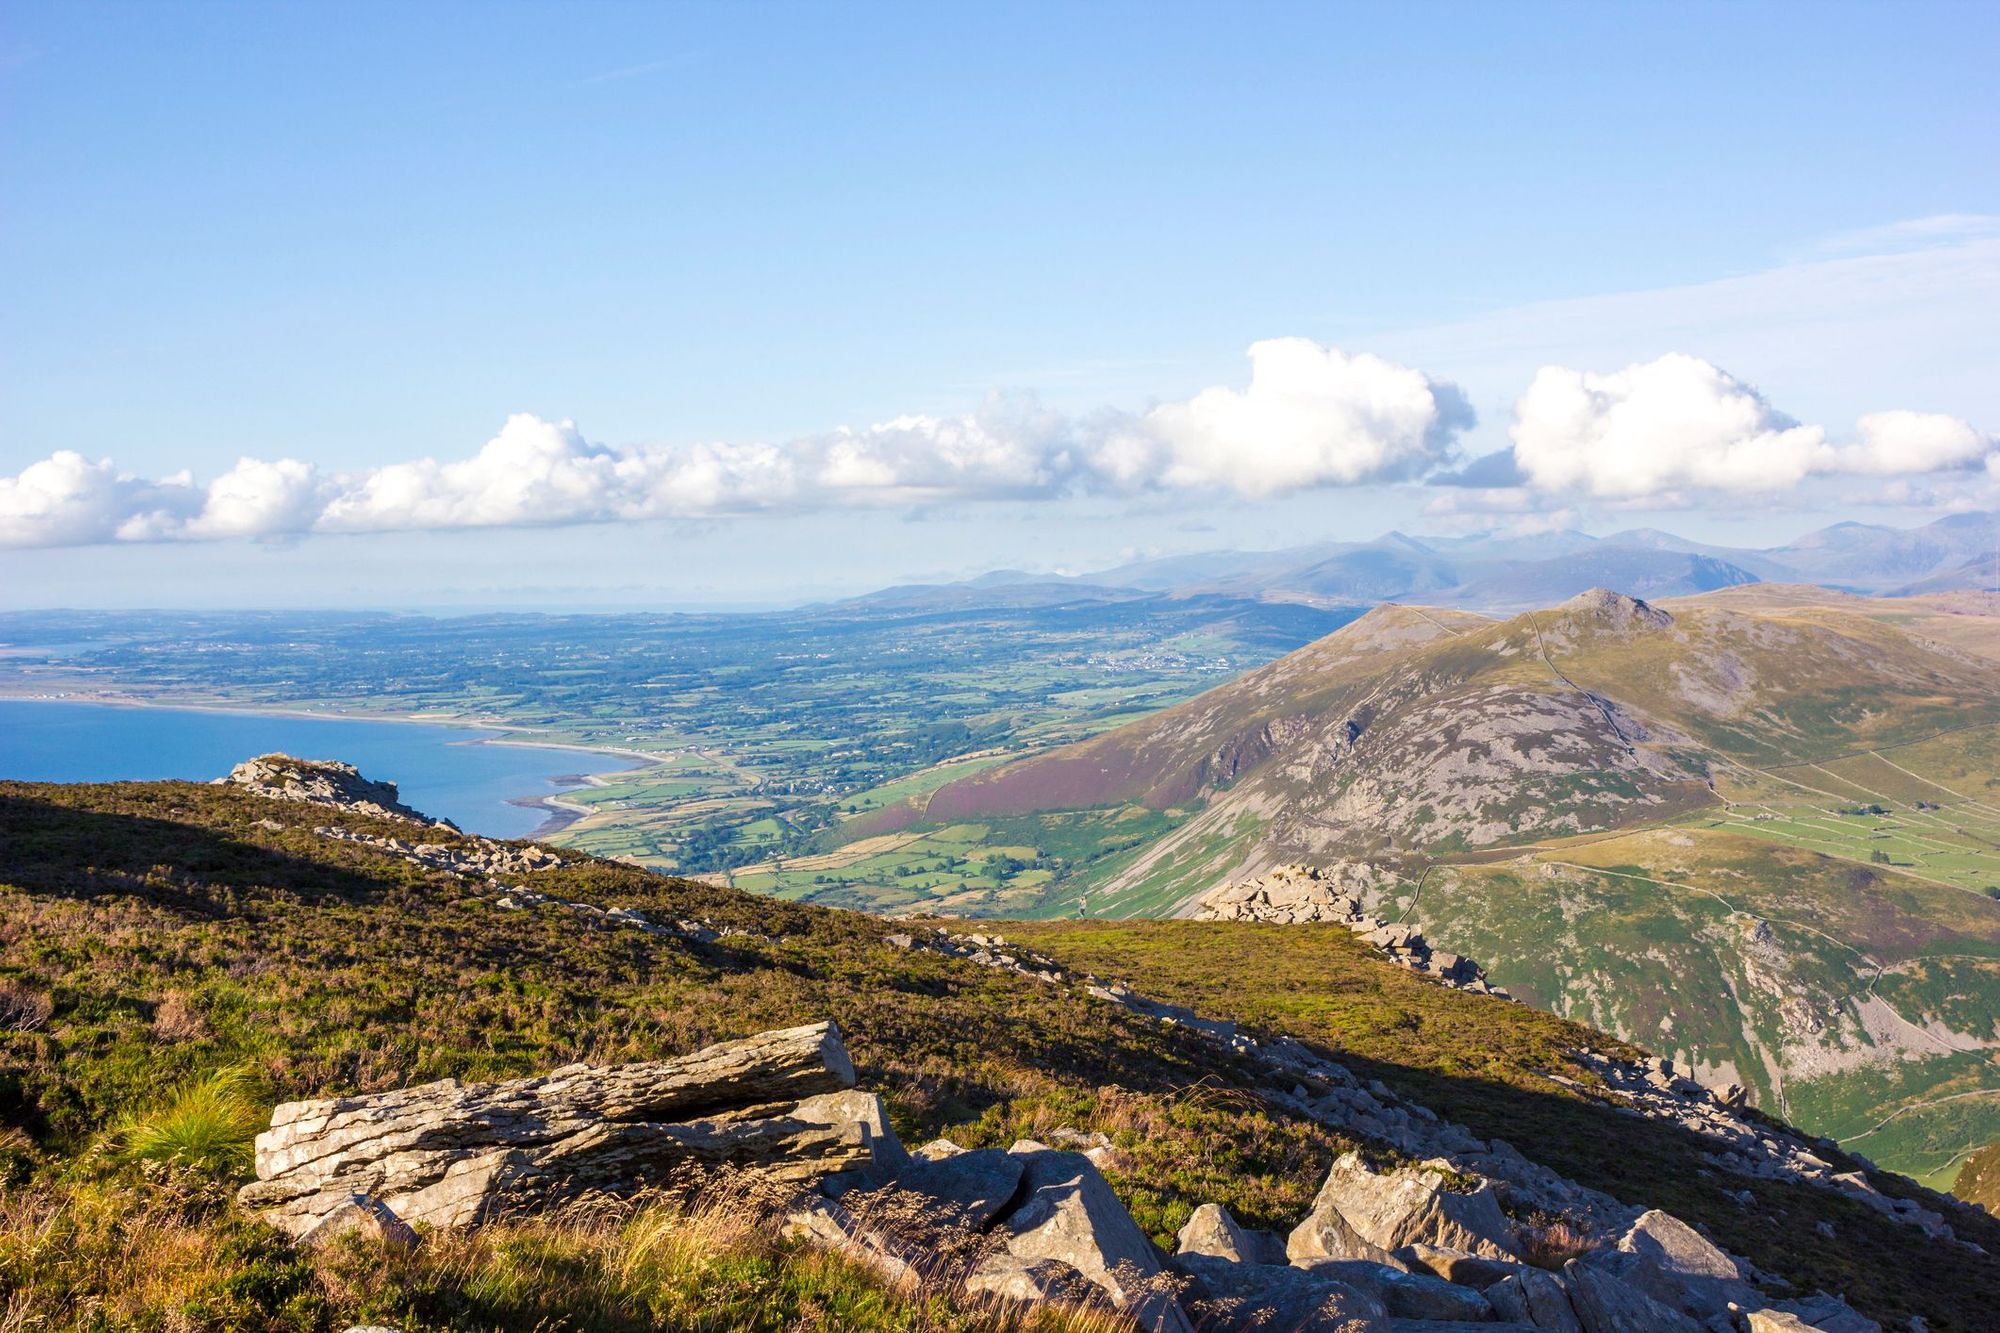 The hills and ocean of Llŷn Peninsula, in the Snowdonia National Park